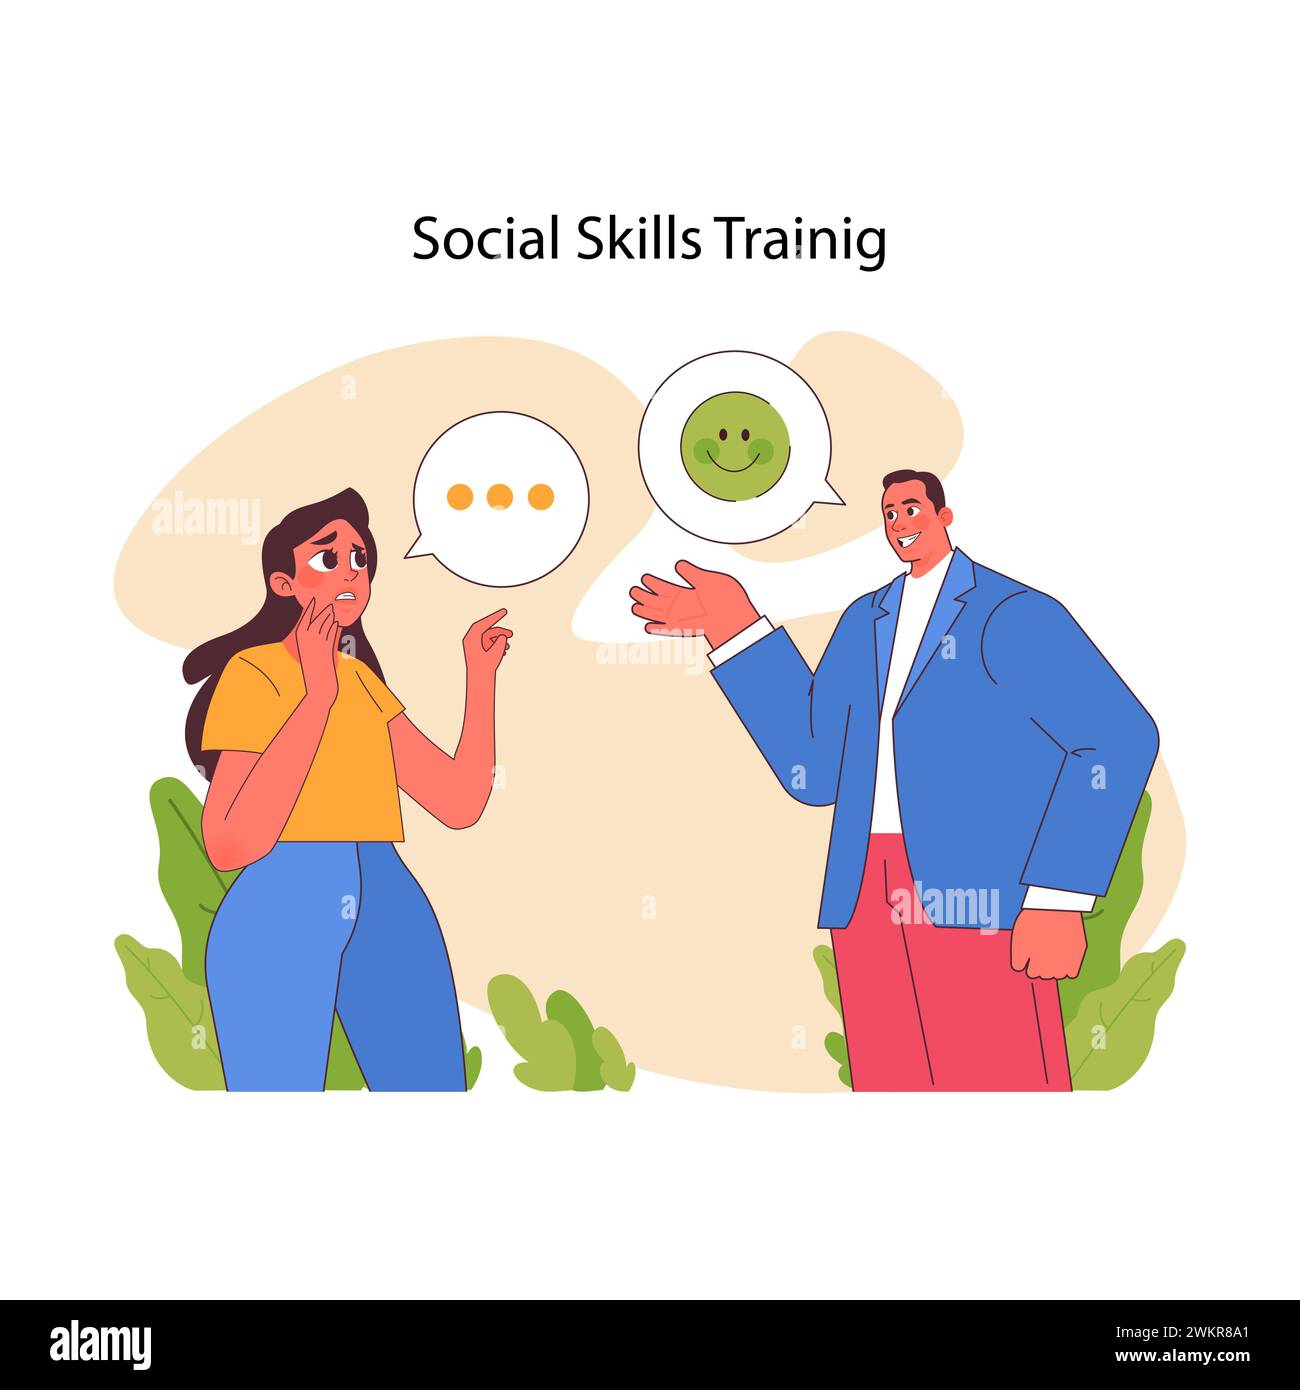 Social Skills Training concept. A scene portraying the learning and application of social cues, enhancing communication in autism. Flat vector illustration Stock Vector